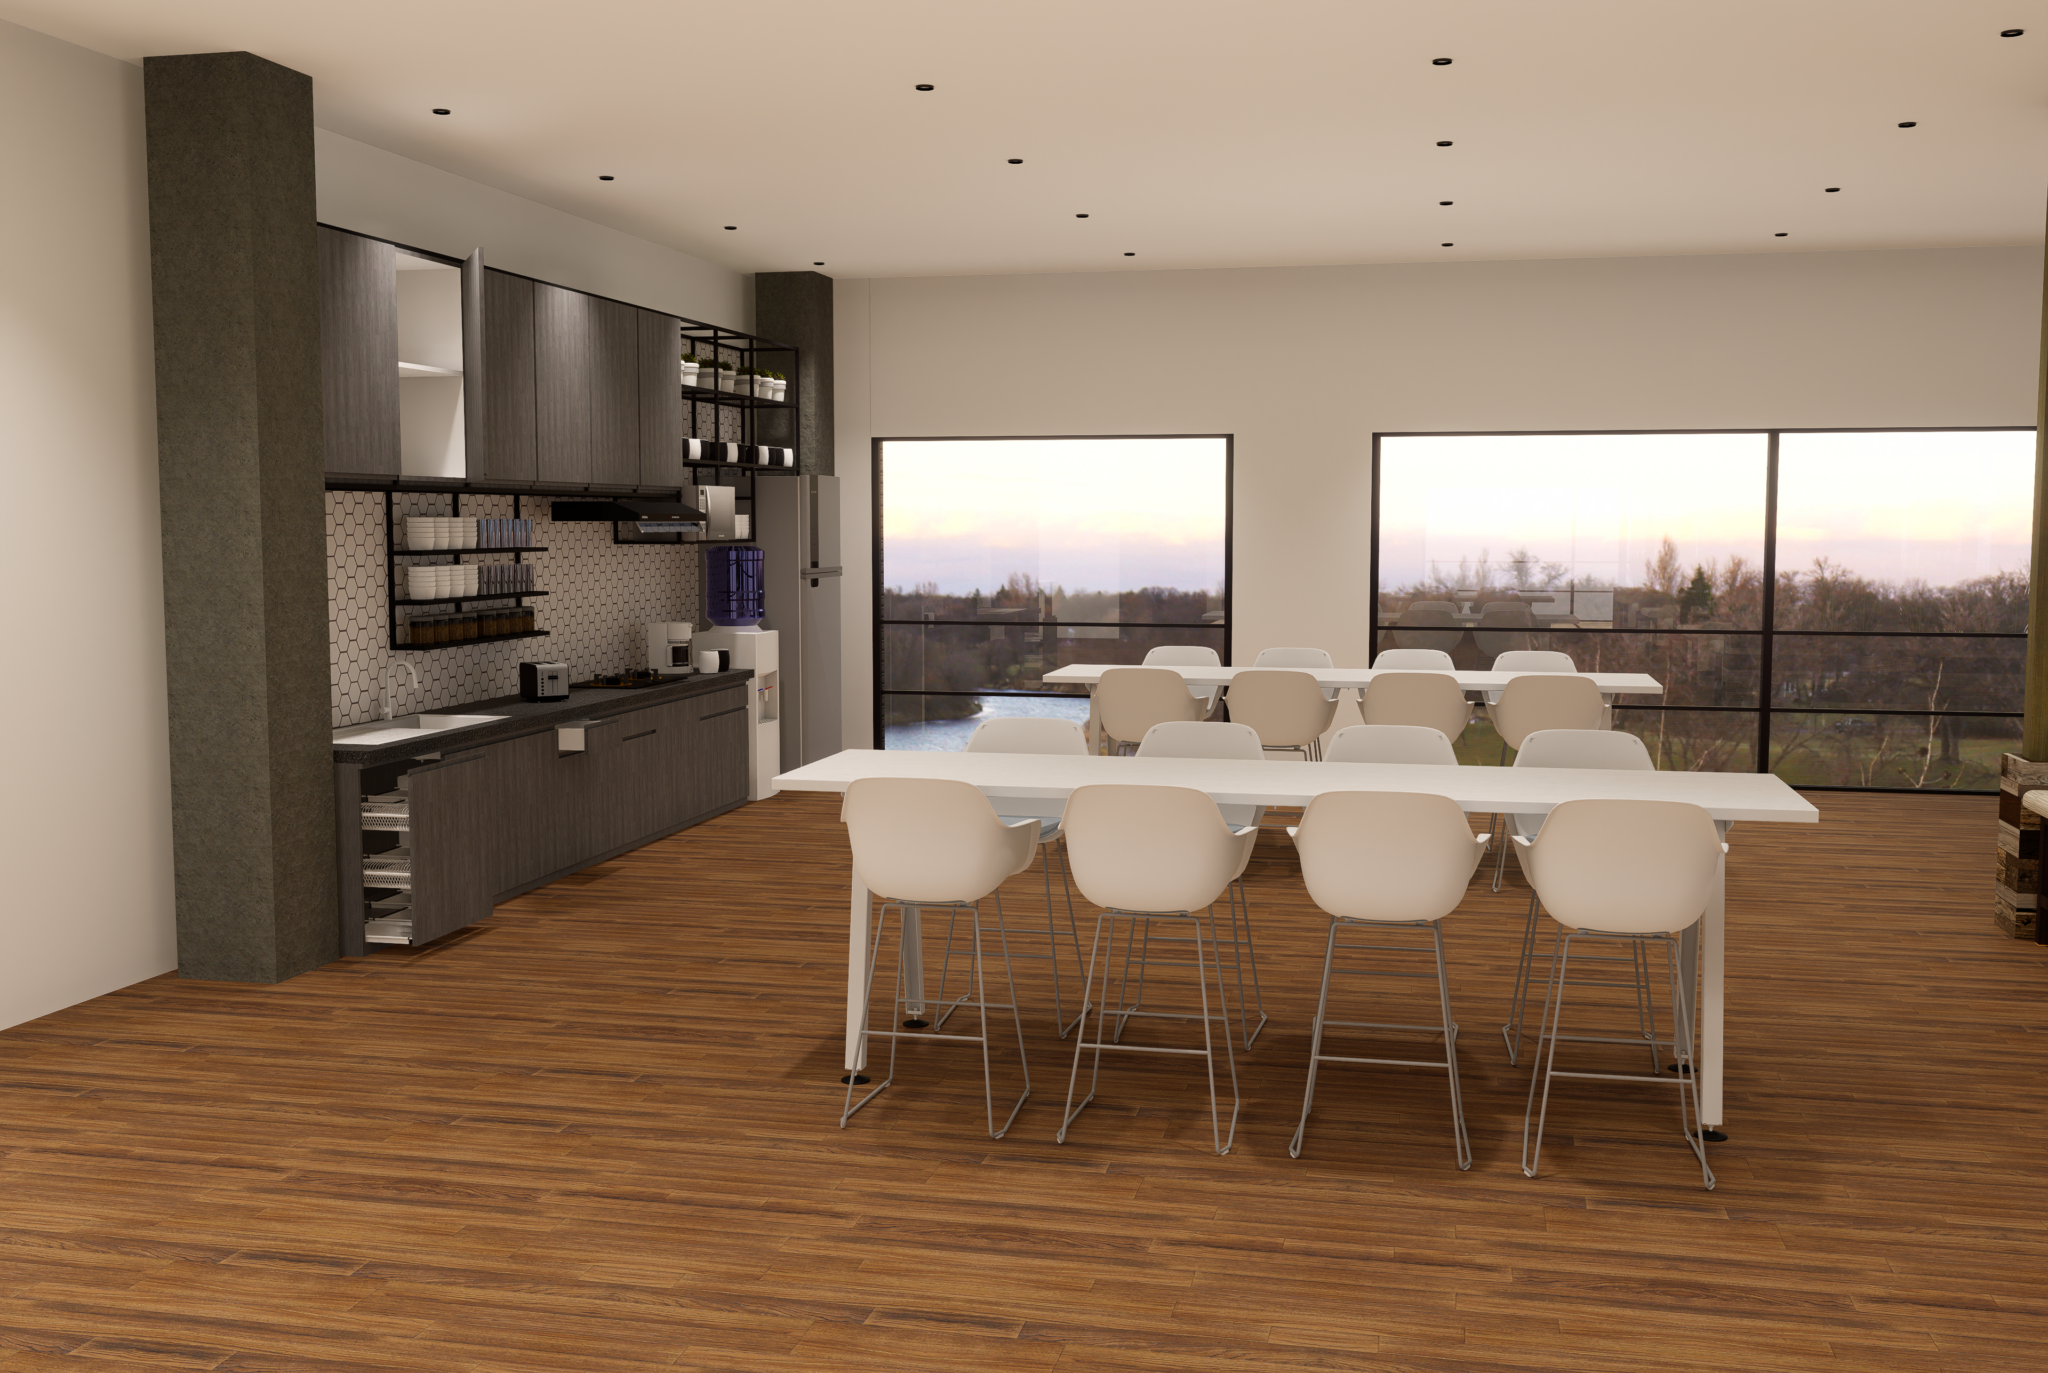 Commercial space rendering of an office kitchen